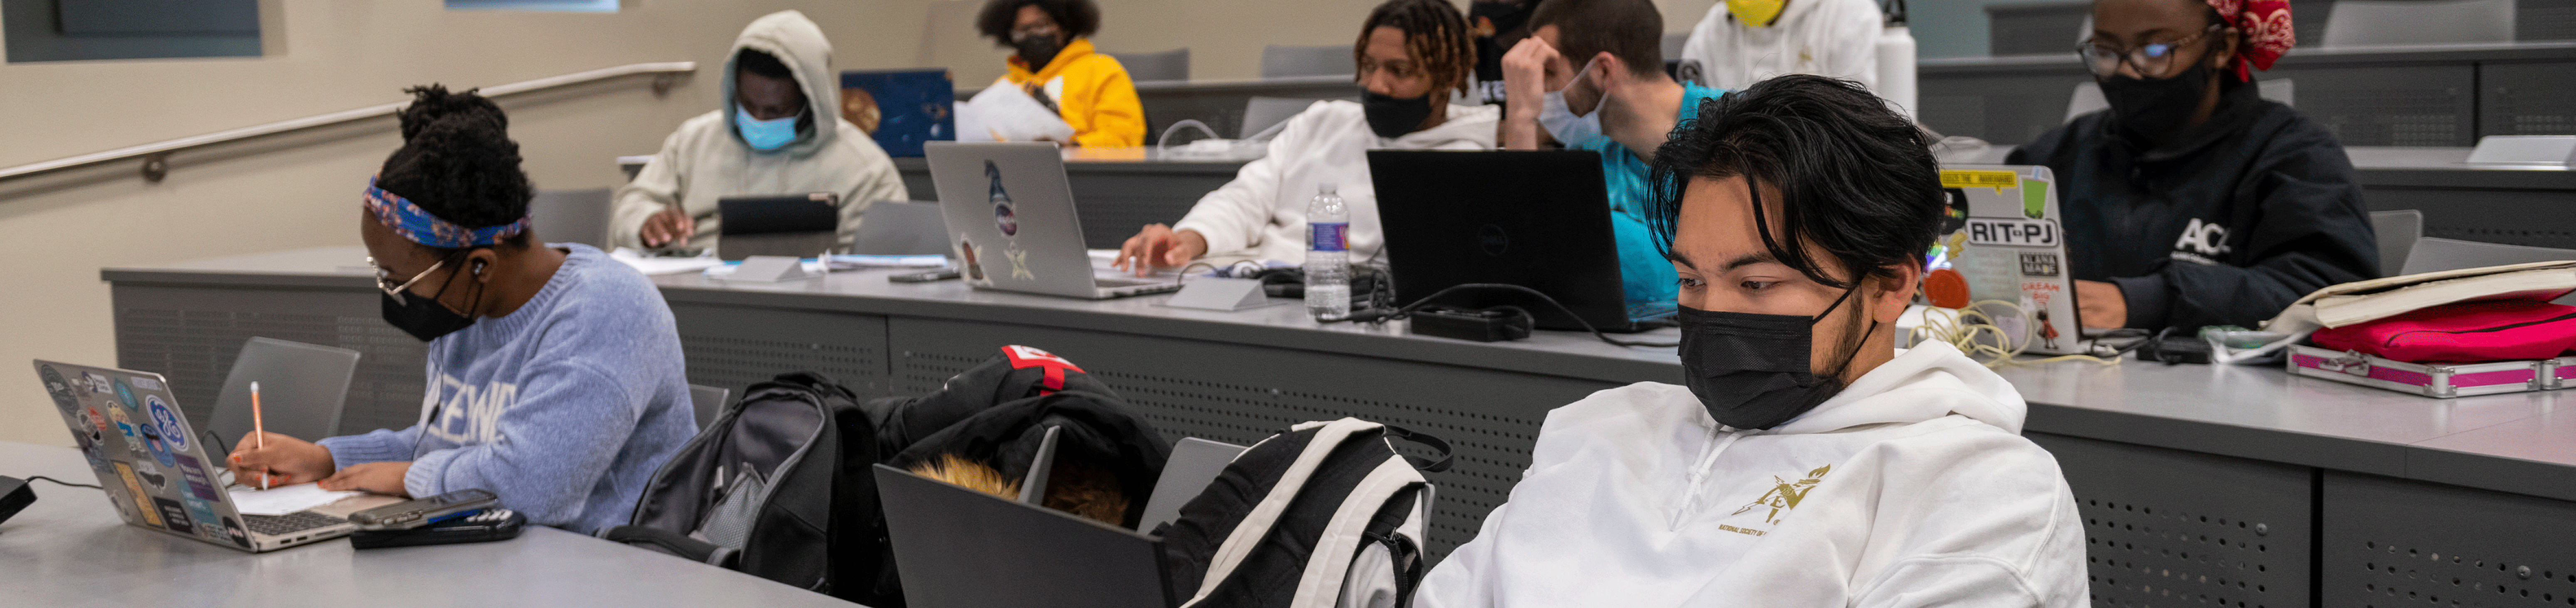 College students studying on laptops in a lecture hall.